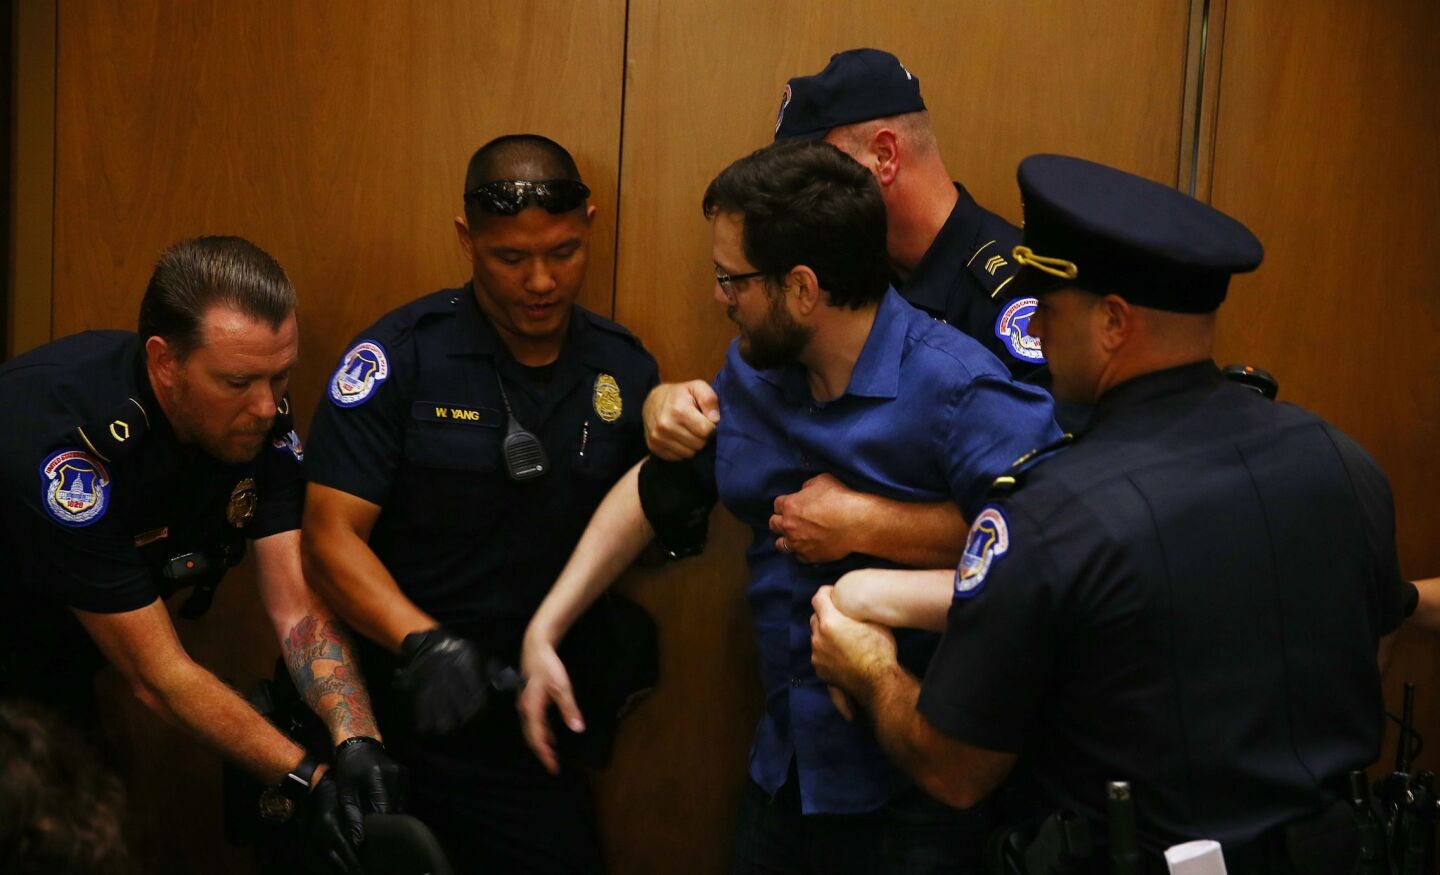 A protester is removed as Judge Brett Kavanaugh appears before his Senate confirmation hearing.